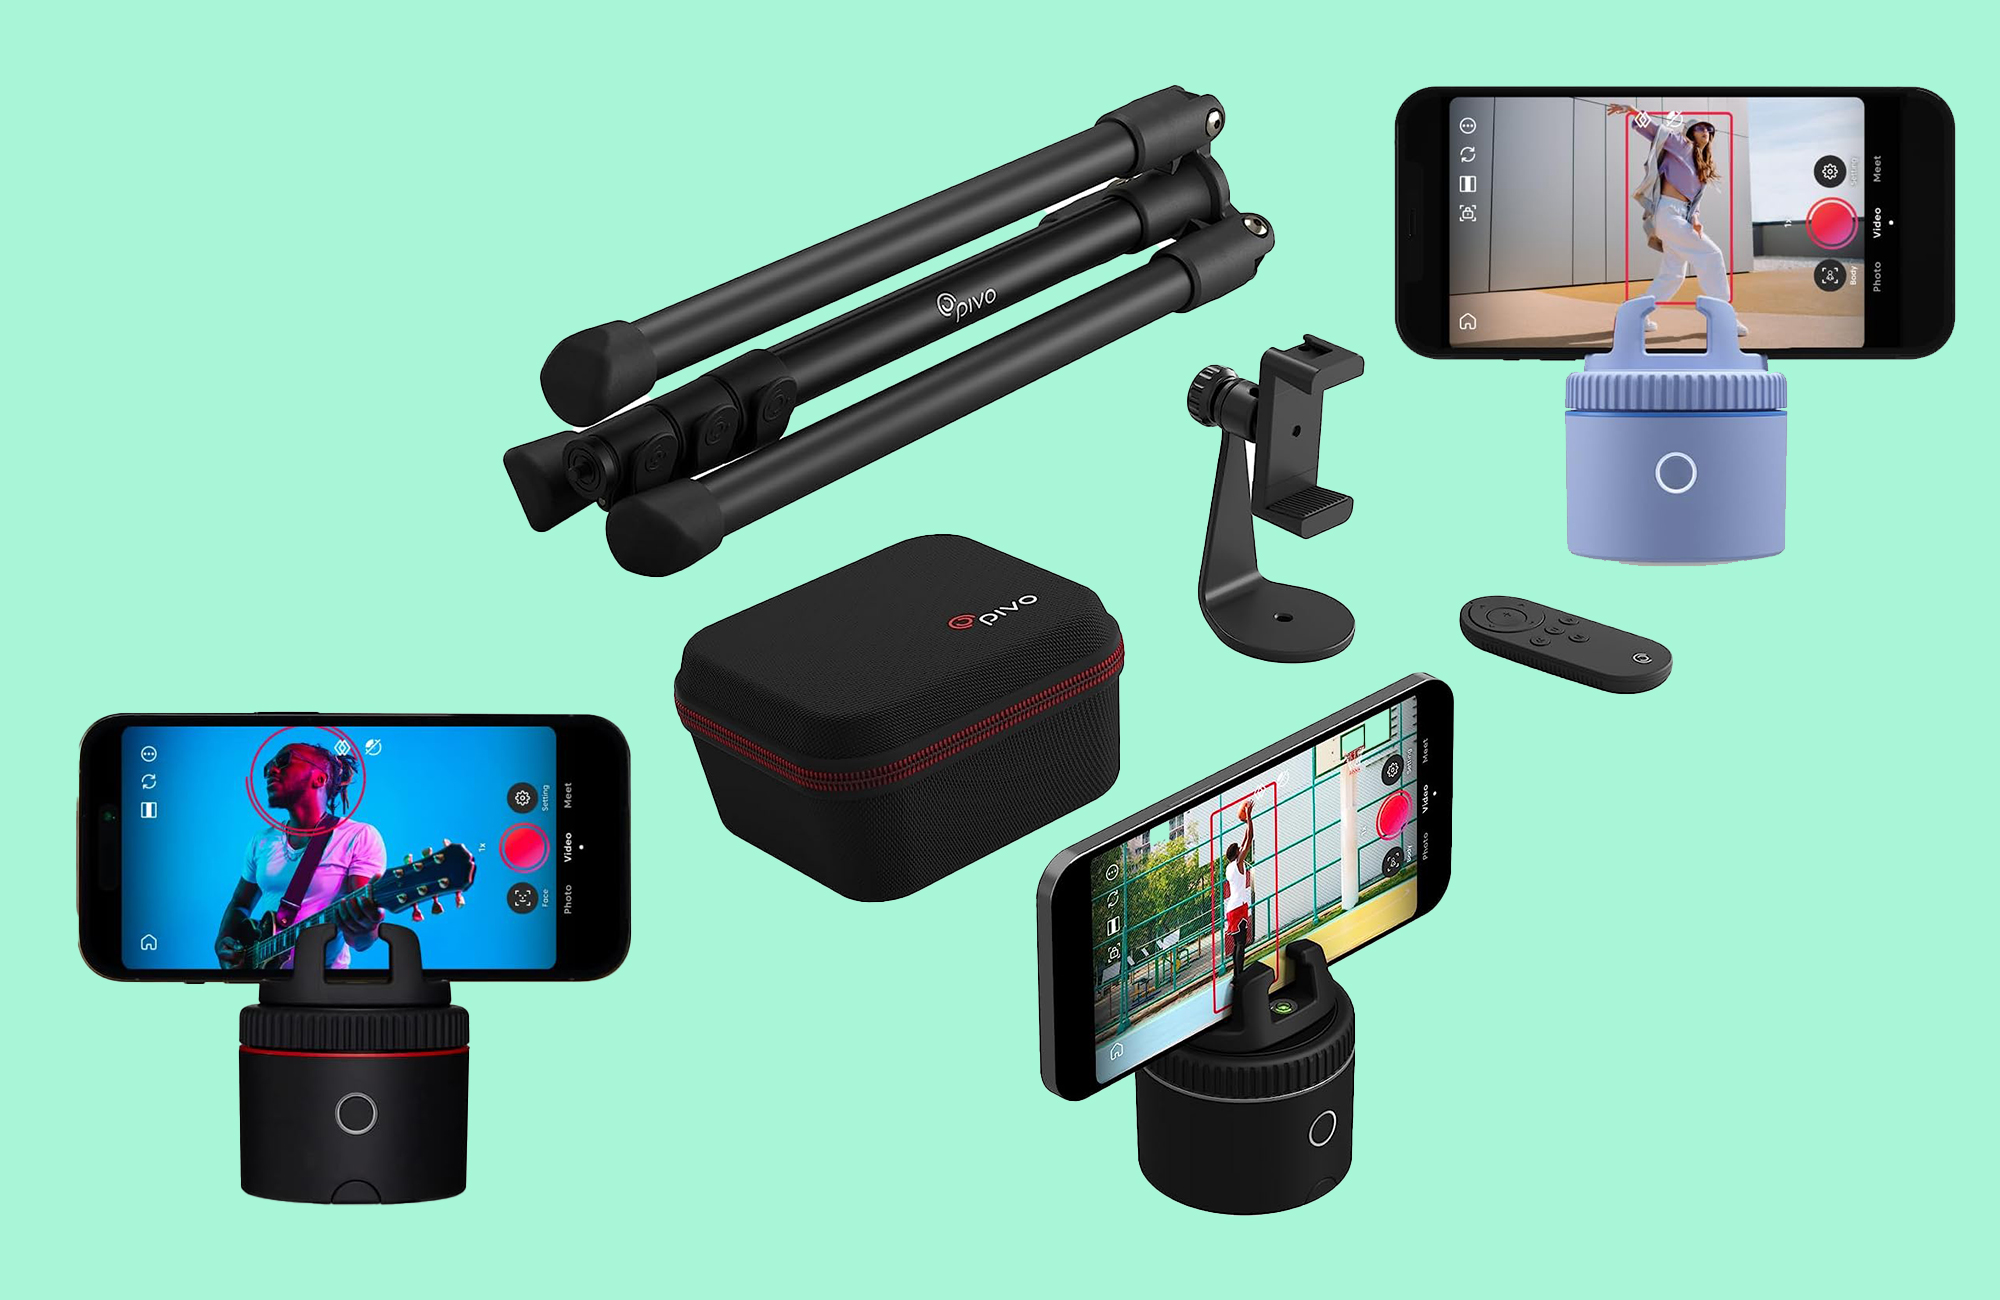 Save up to 40 percent on Pivo auto-tracking camera mounts for Prime Day